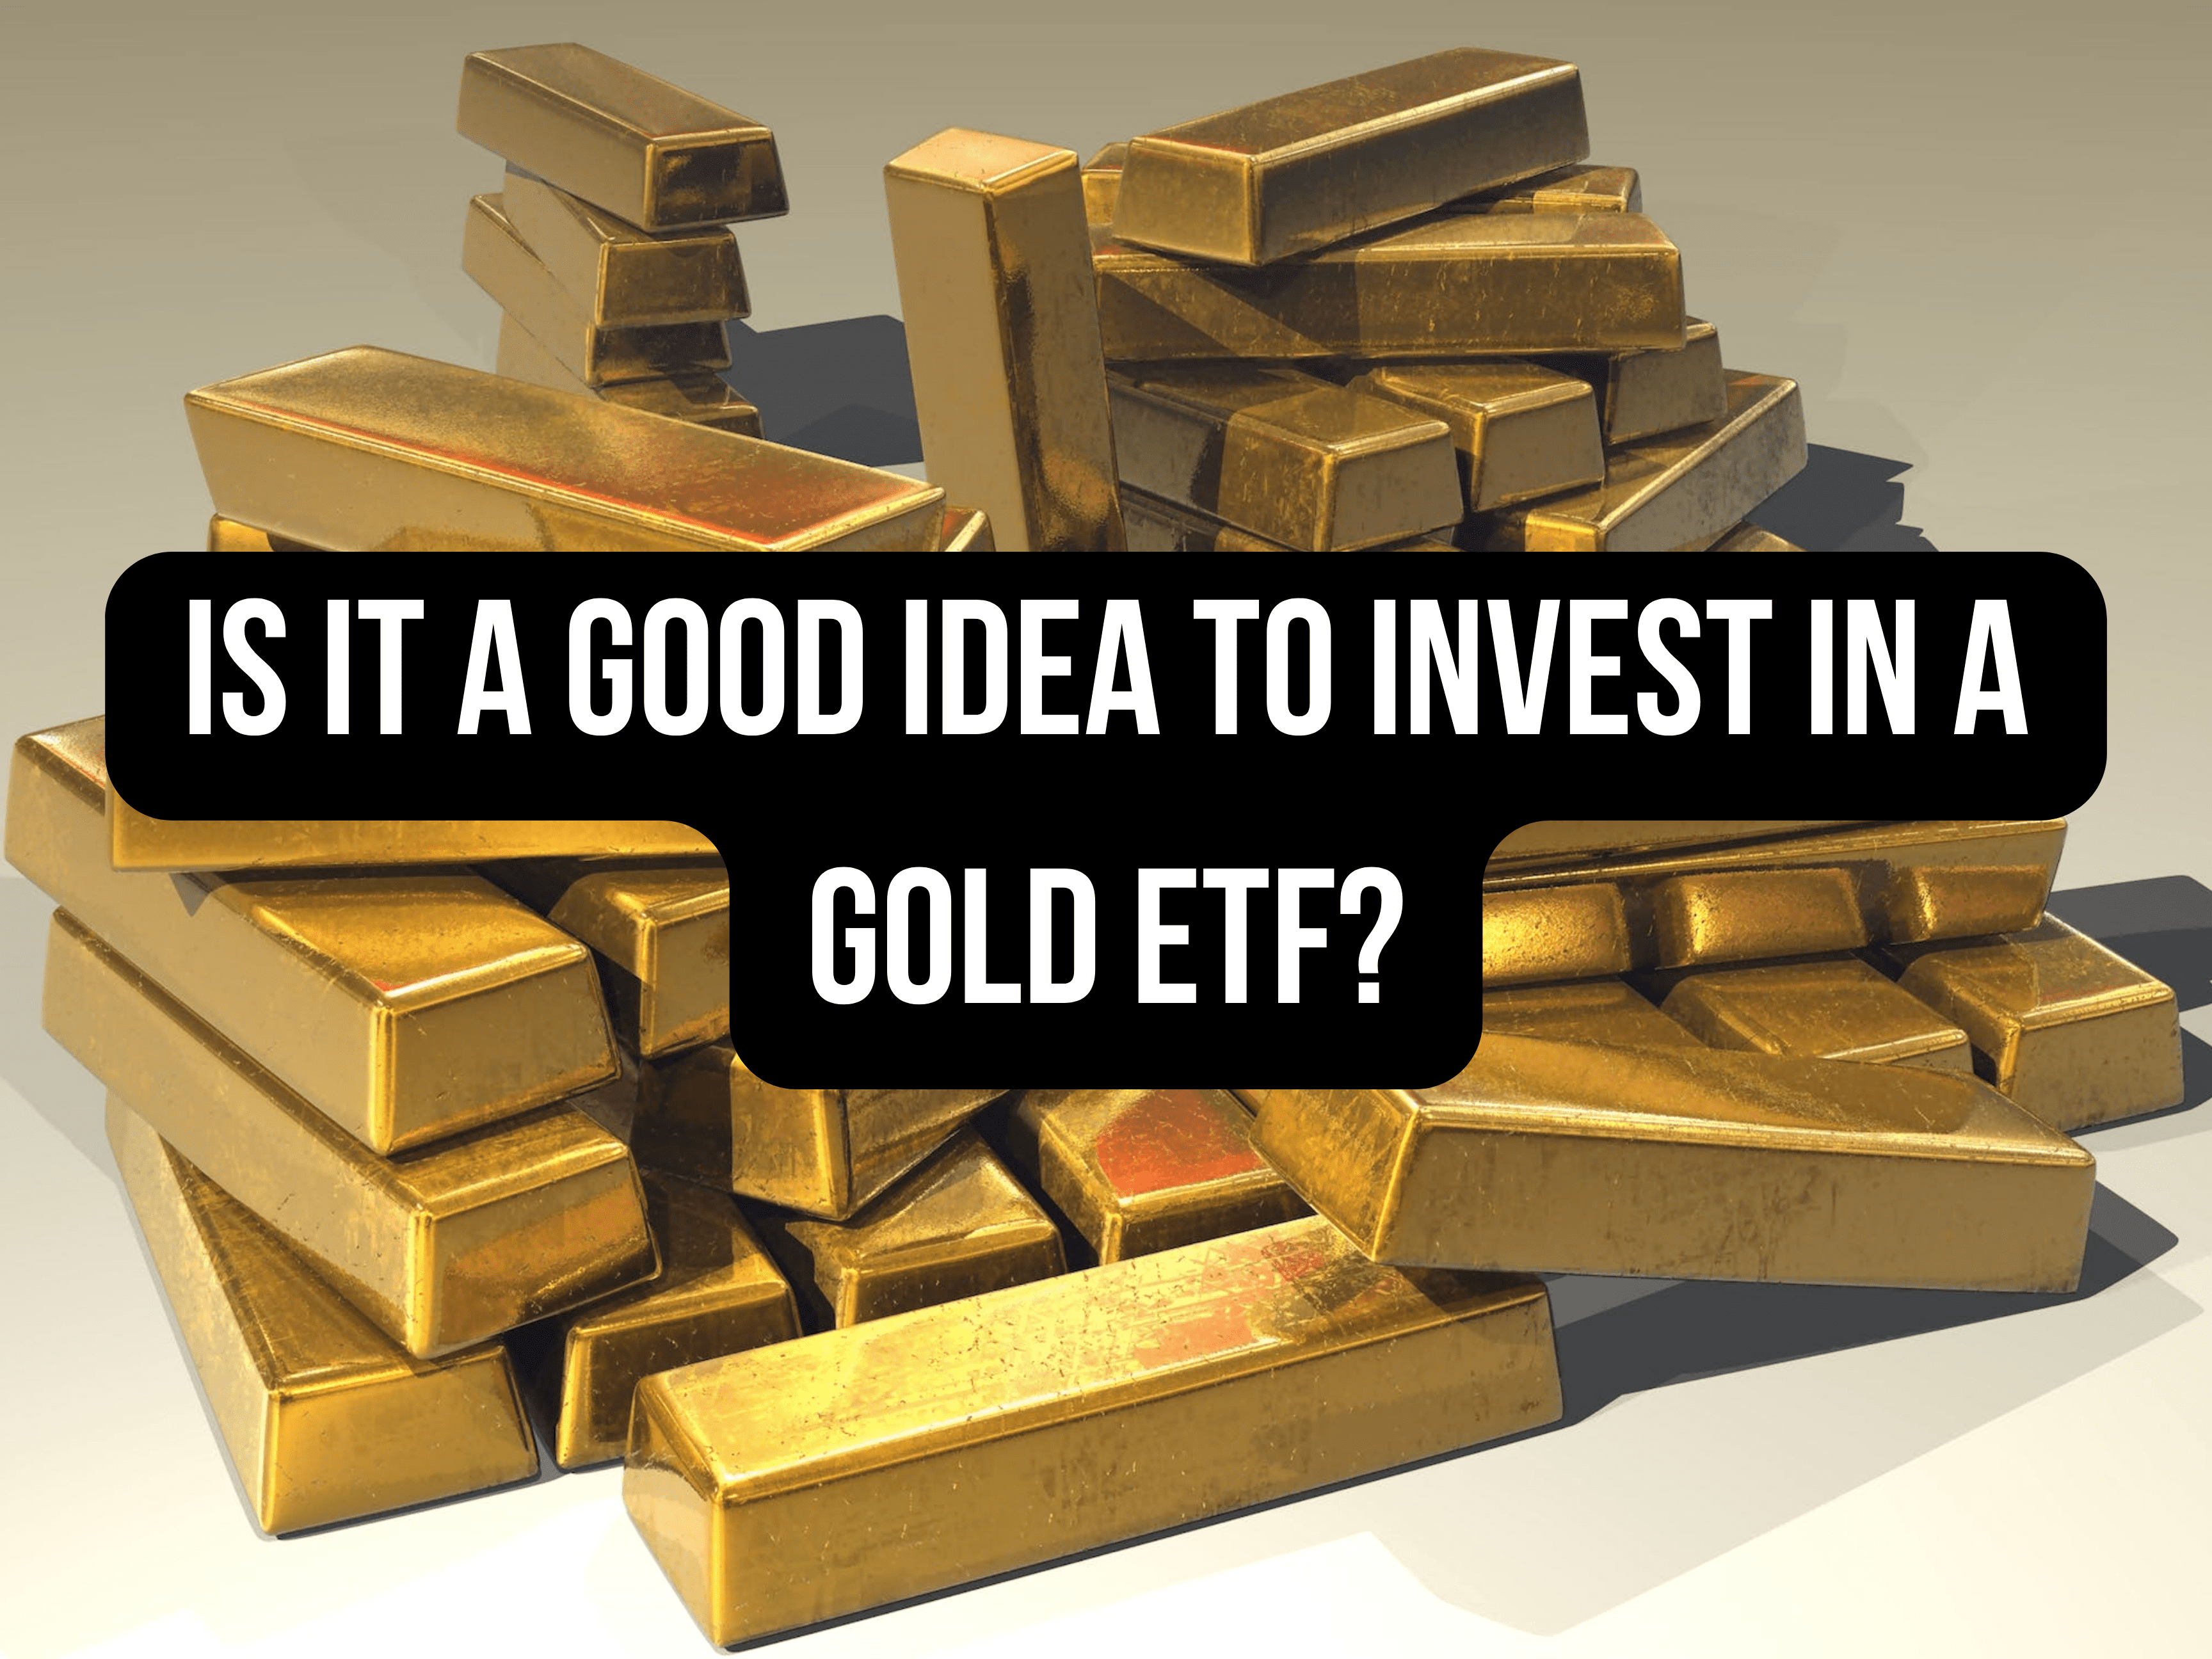 Is it a Good Idea to Invest in a Gold ETF?